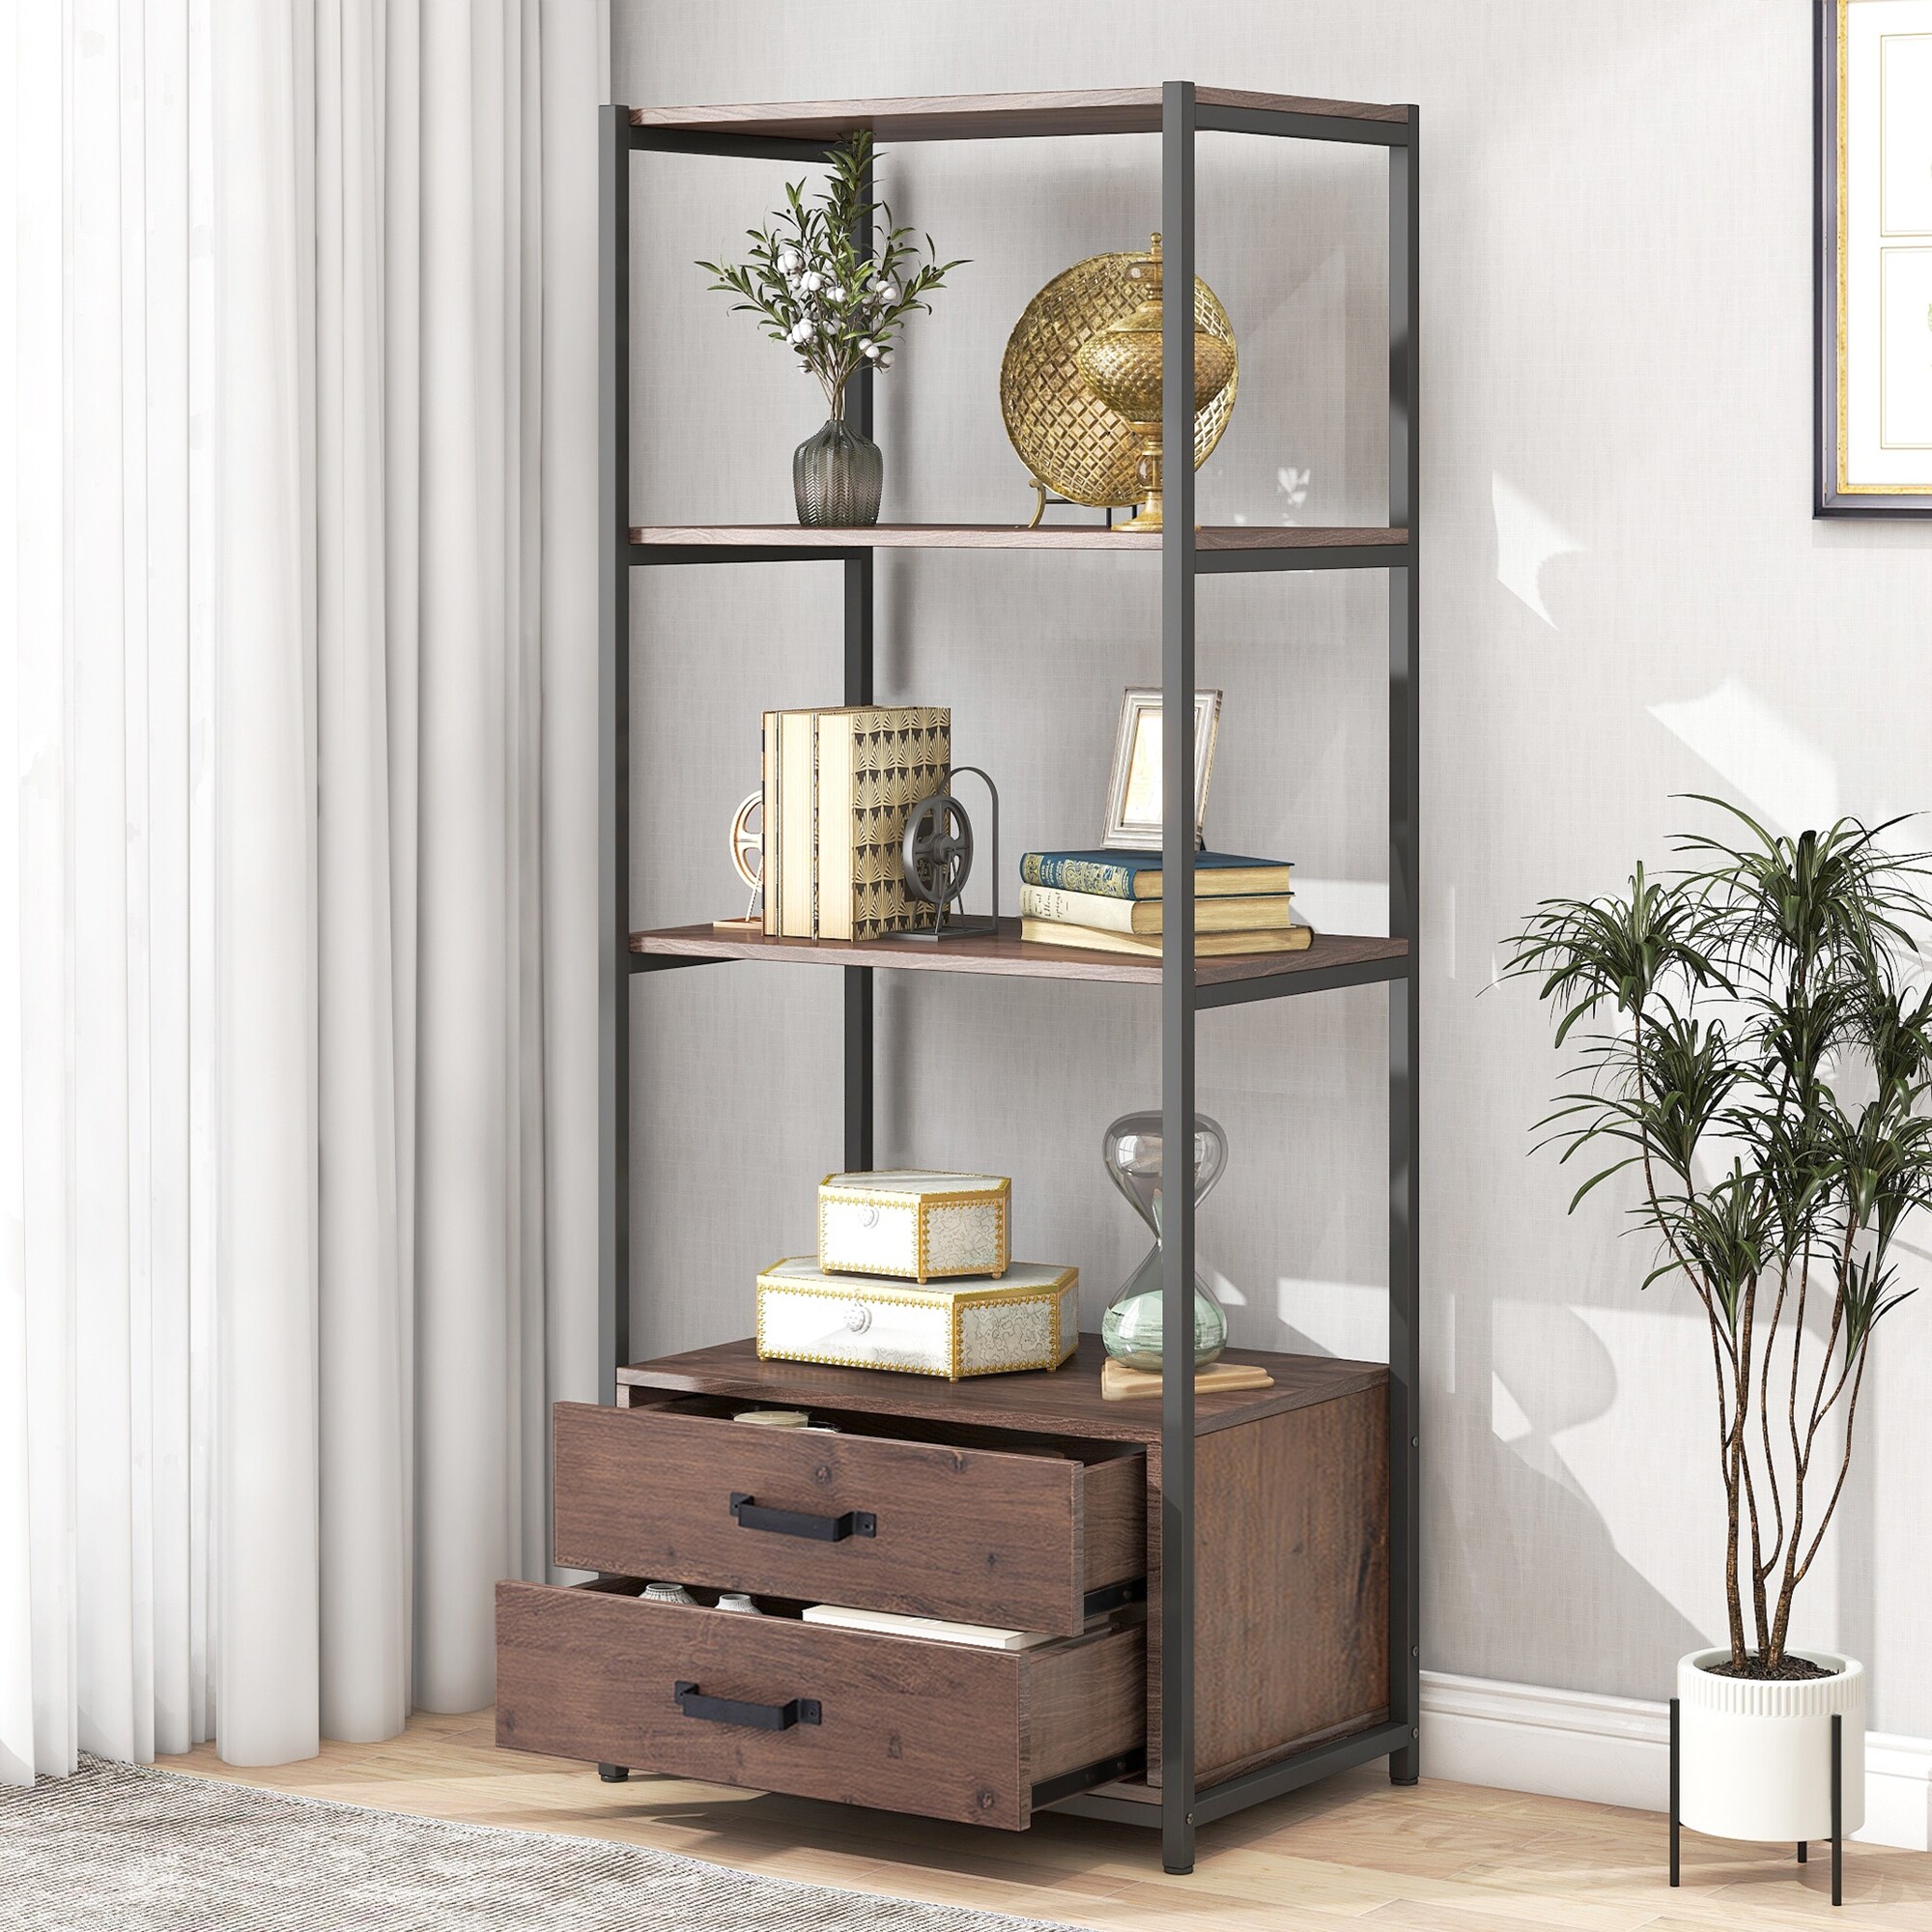 https://ak1.ostkcdn.com/images/products/is/images/direct/9619d22883ac81b406a6223fb11b7bf68c5b6c5e/Home-Office-4-Tier-Bookshelf%2C-Standing-Shelf-Unit-Storage-Organizer-with-4-Open-Storage-Shelves-and-2-Drawers.jpg